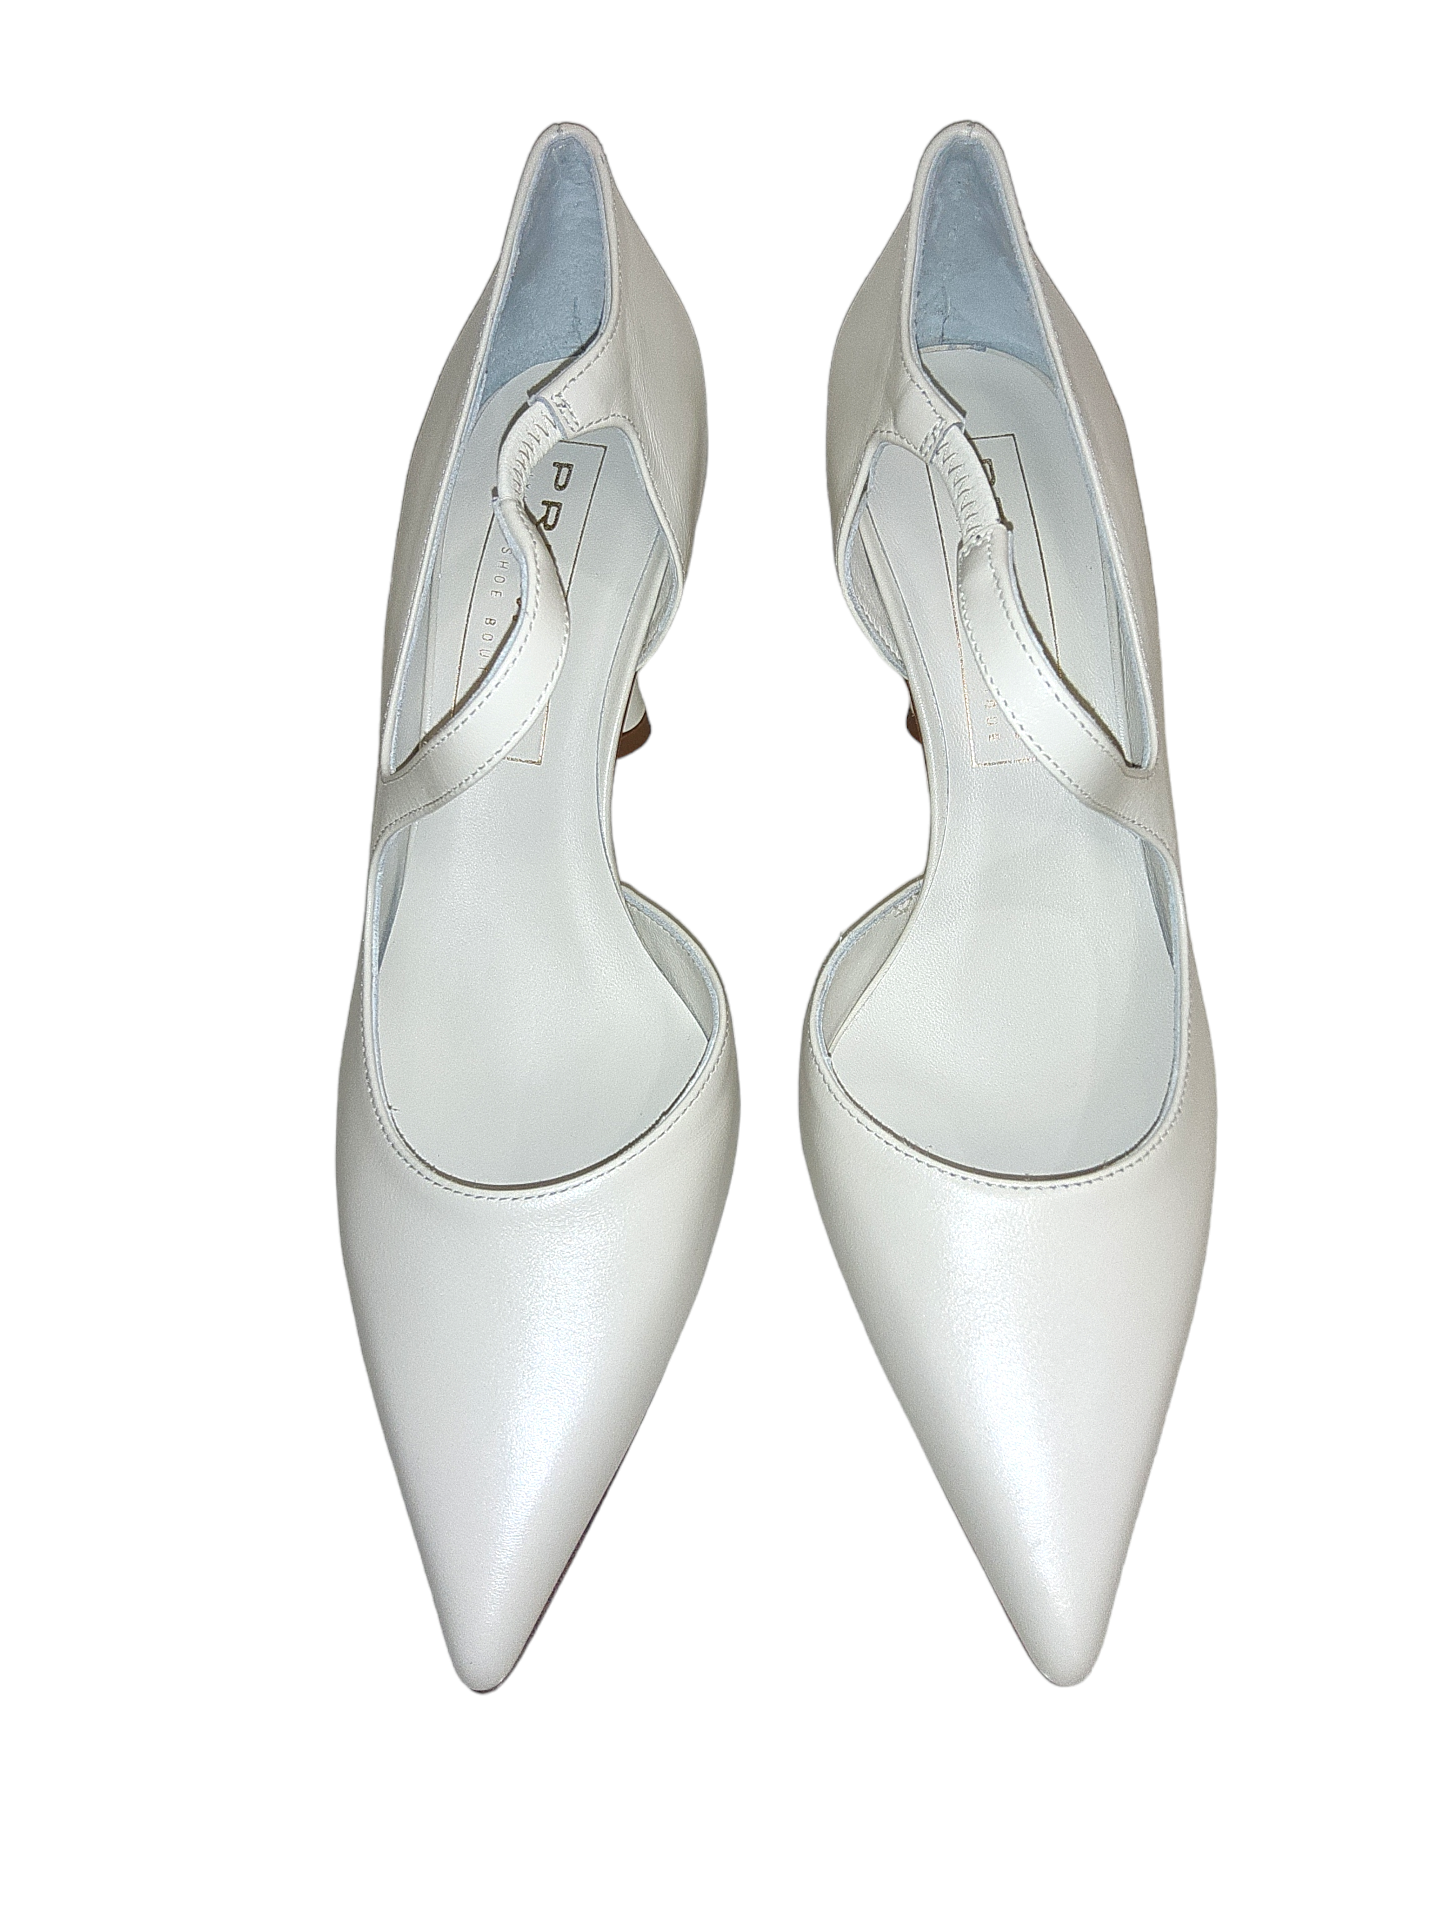 White leather court shoe